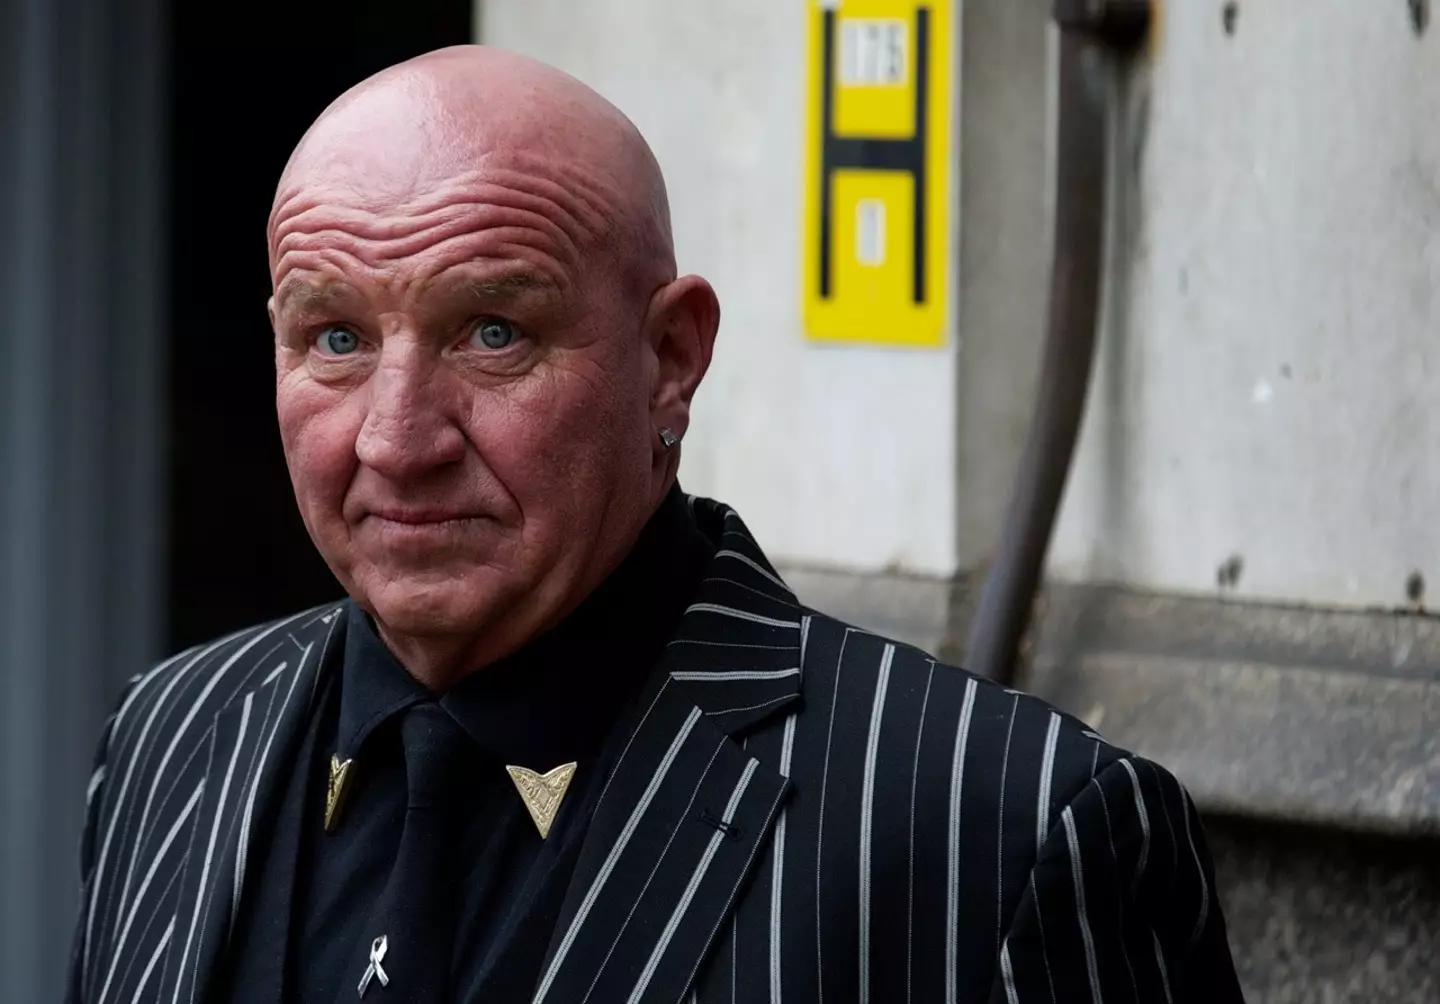 The 'most feared man in Britain’ Dave Courtney has died at the age of 64.